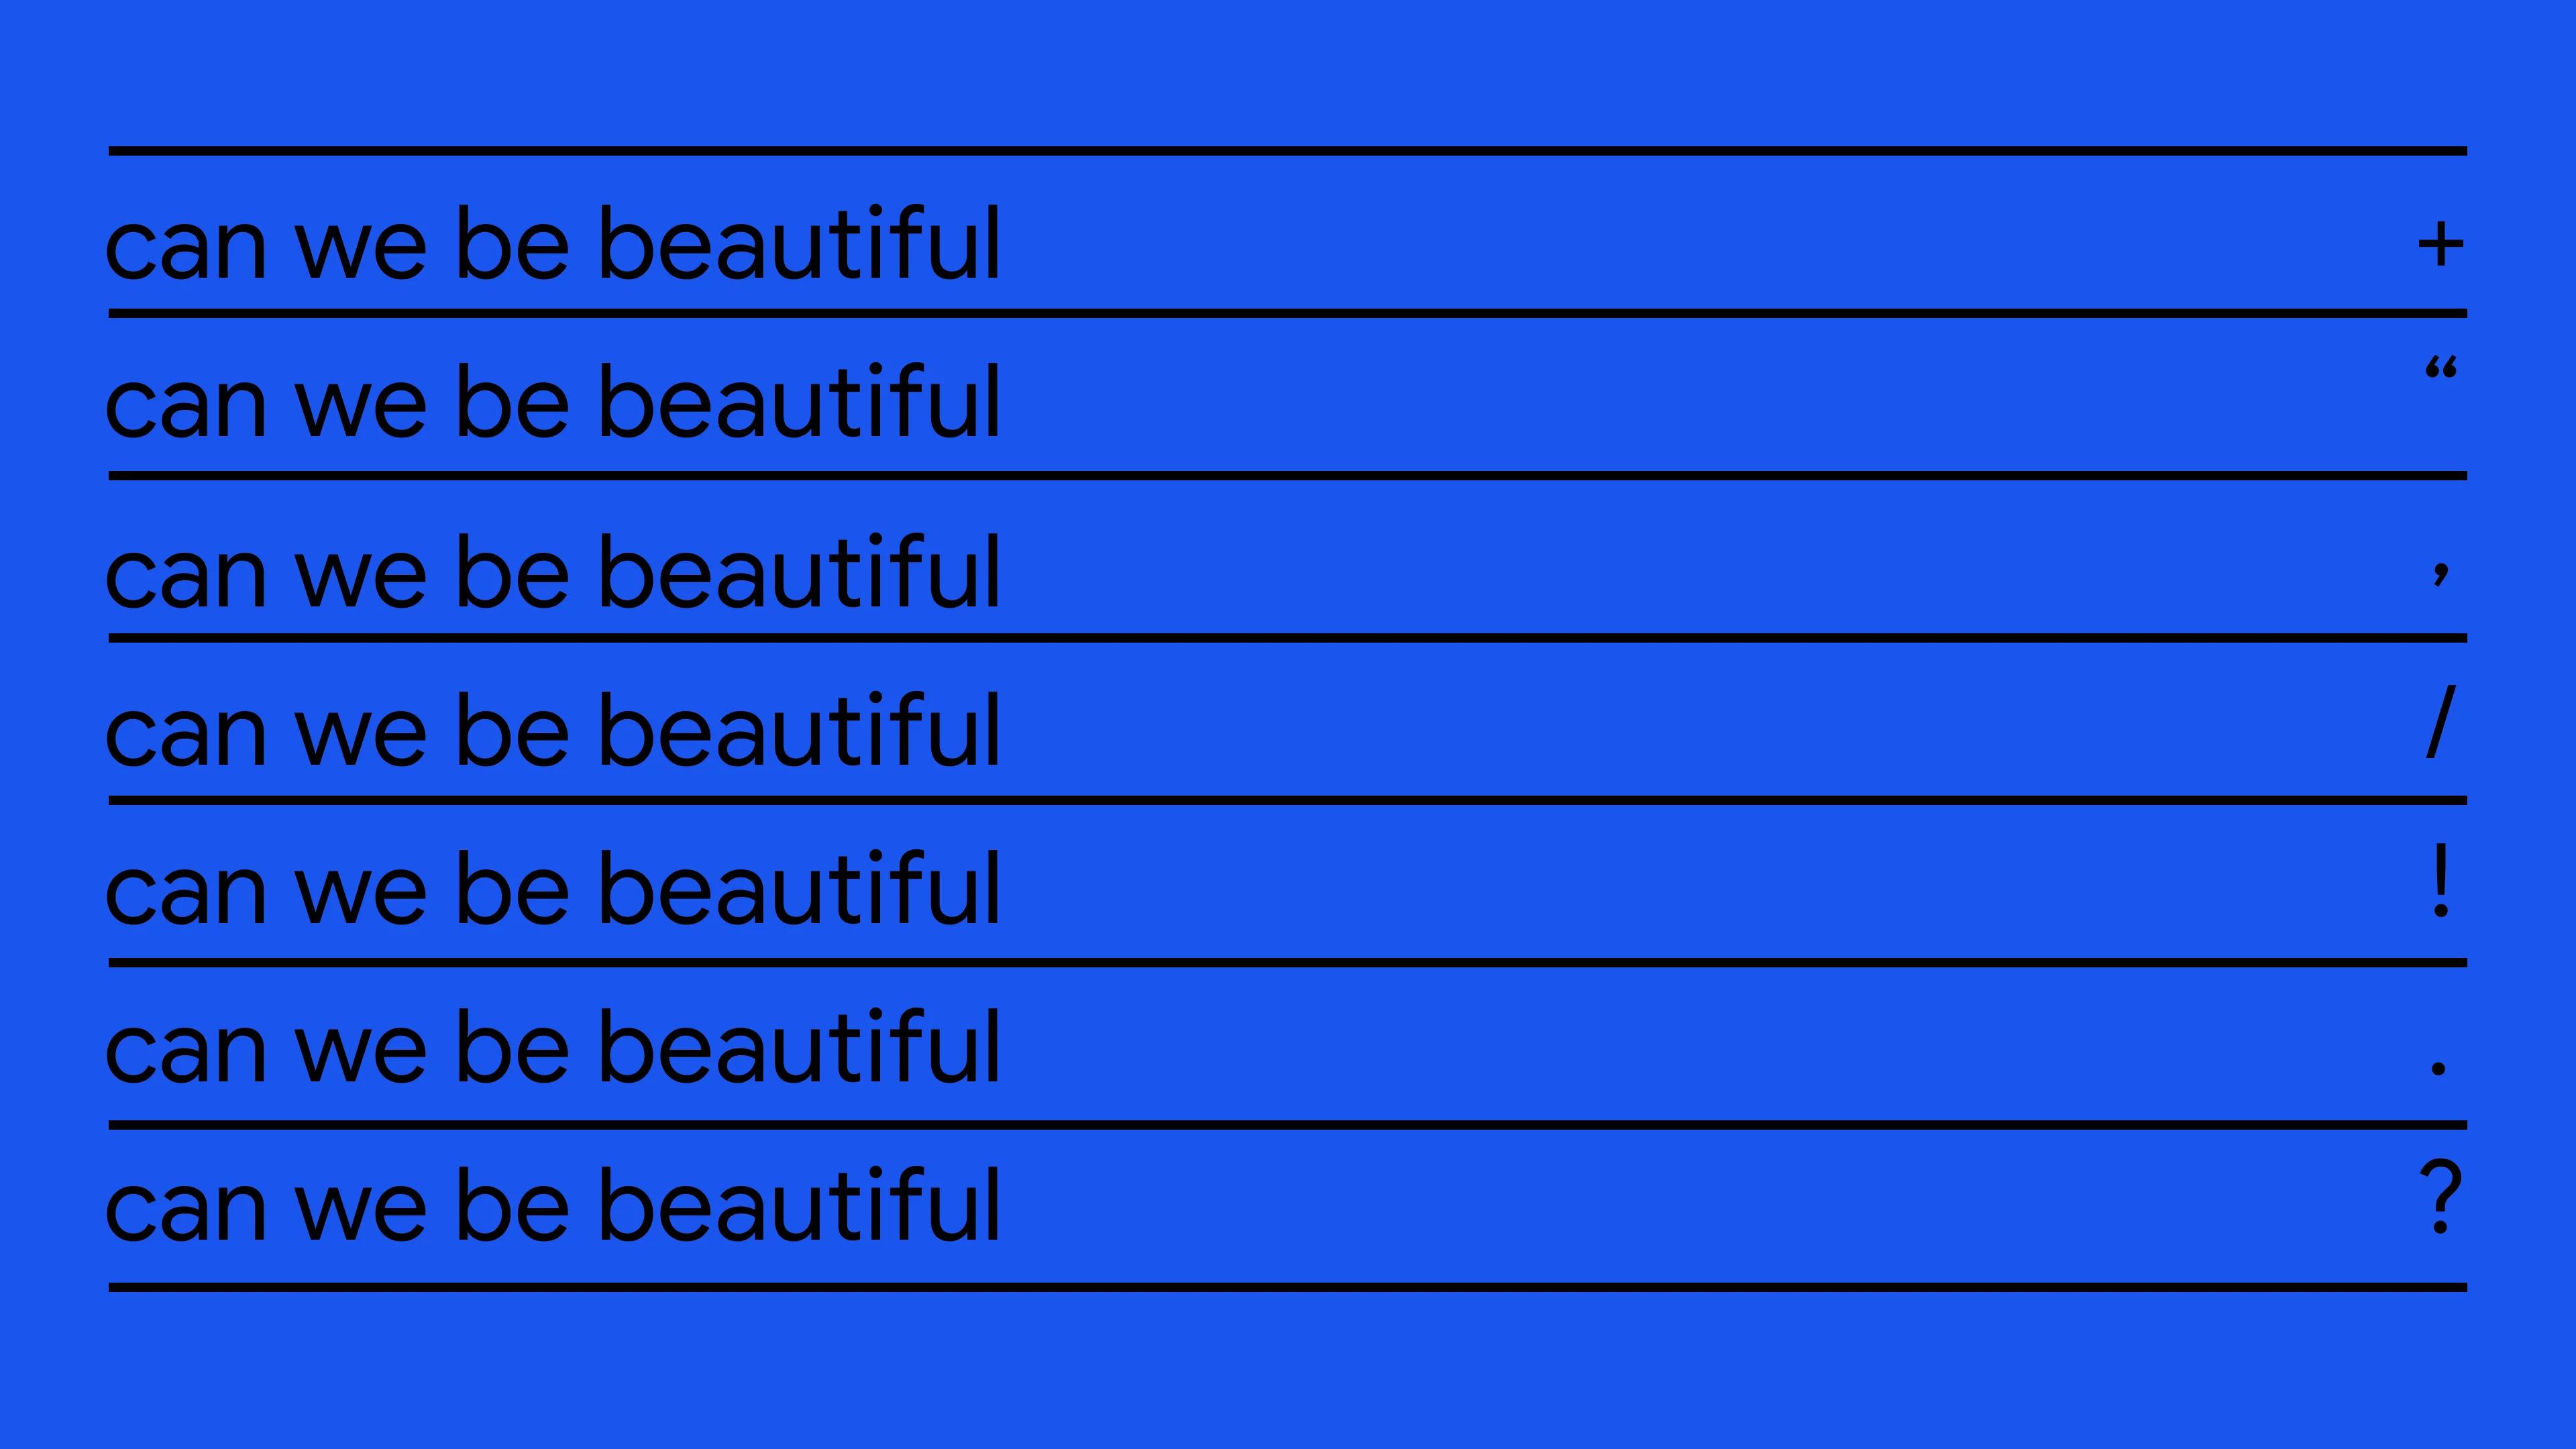 Black text on blue background reads 'can we be beautiful'